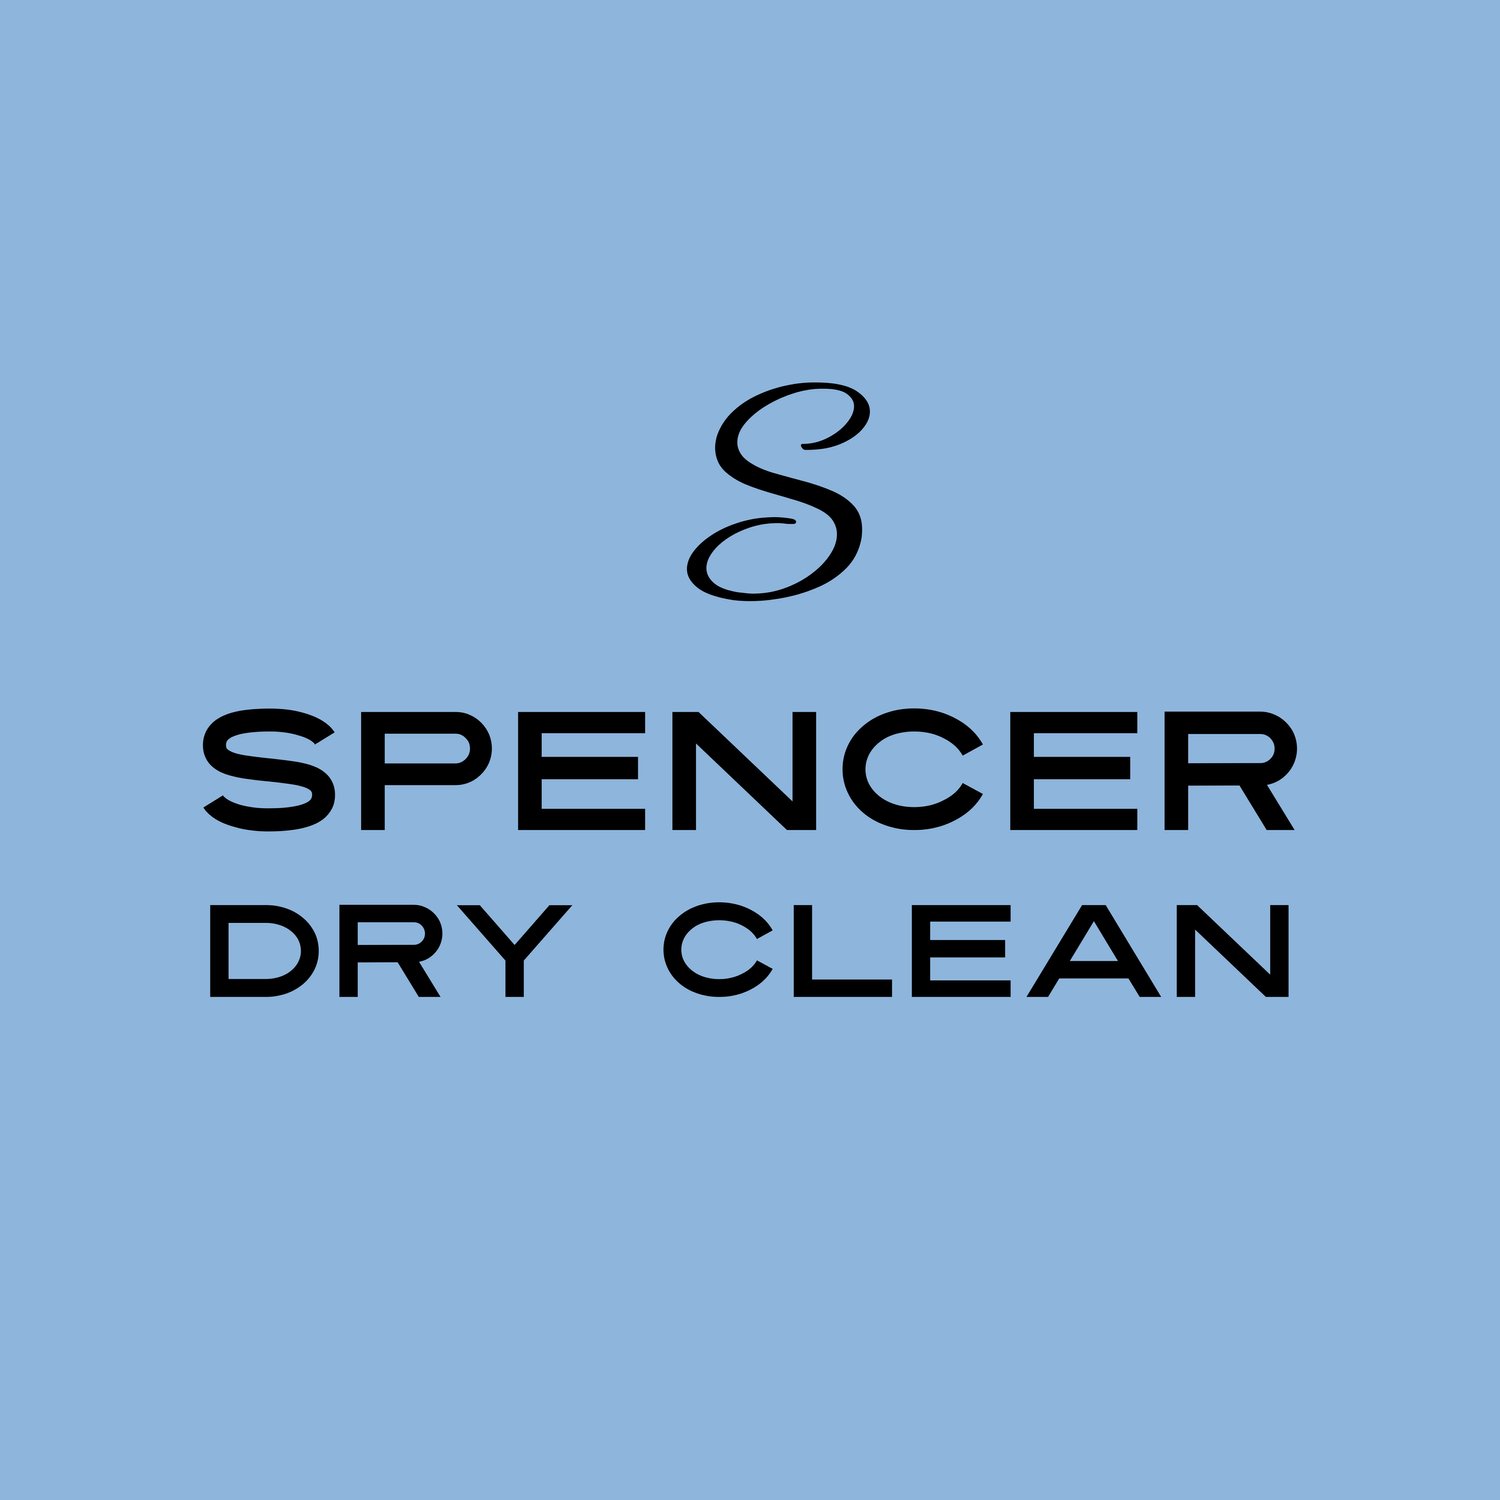 Spencer Dry Cleaners